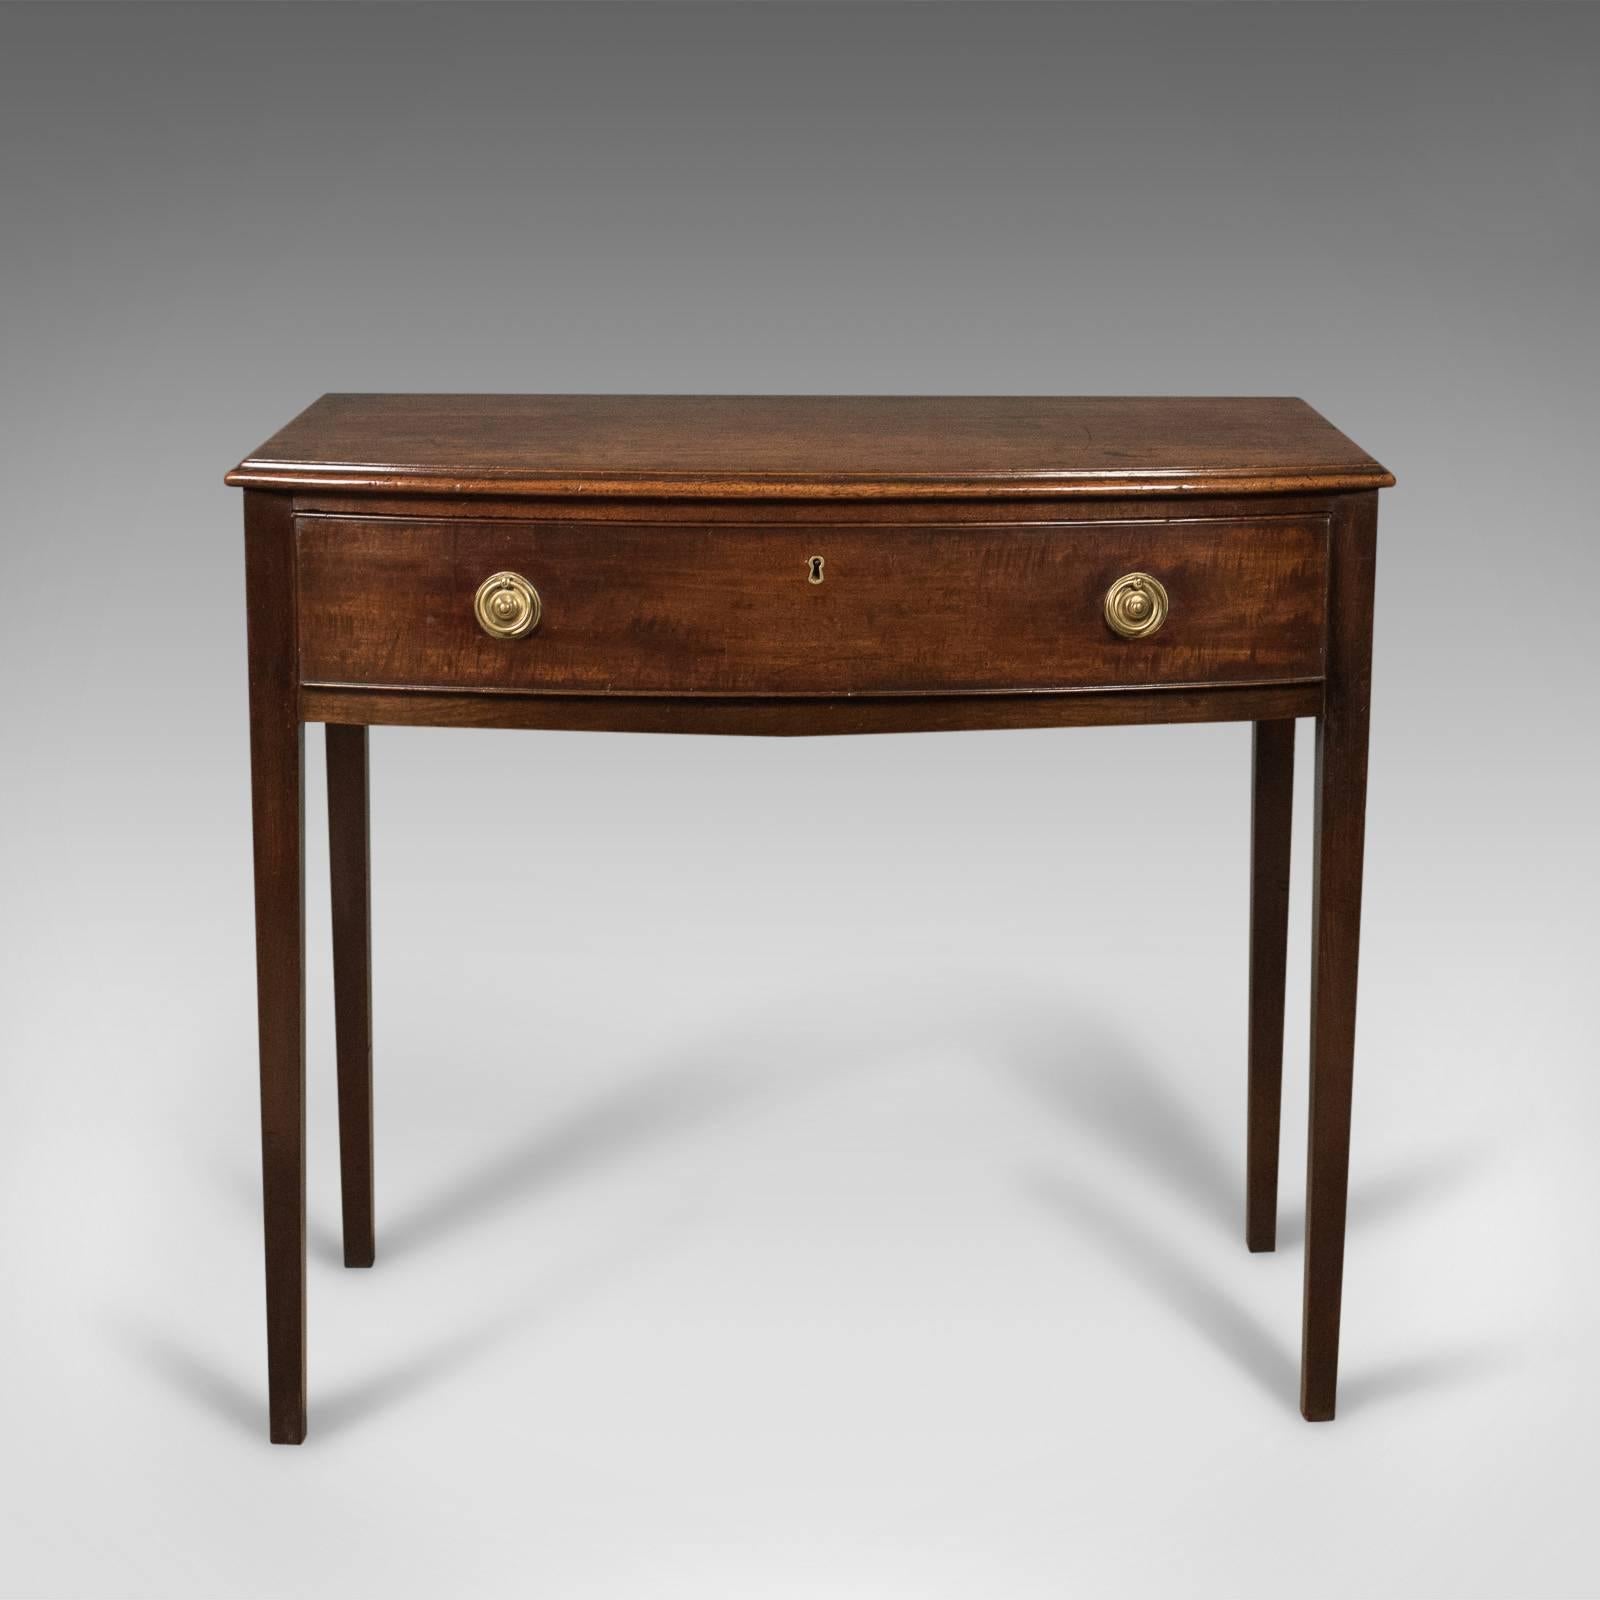 This is an appealing antique side table in mahogany, bow fronted, English and dating to the reign of George III, circa 1770.

Displaying good proportions in an elegant, Classic design
Mahogany showing consistent color, grain interest and a